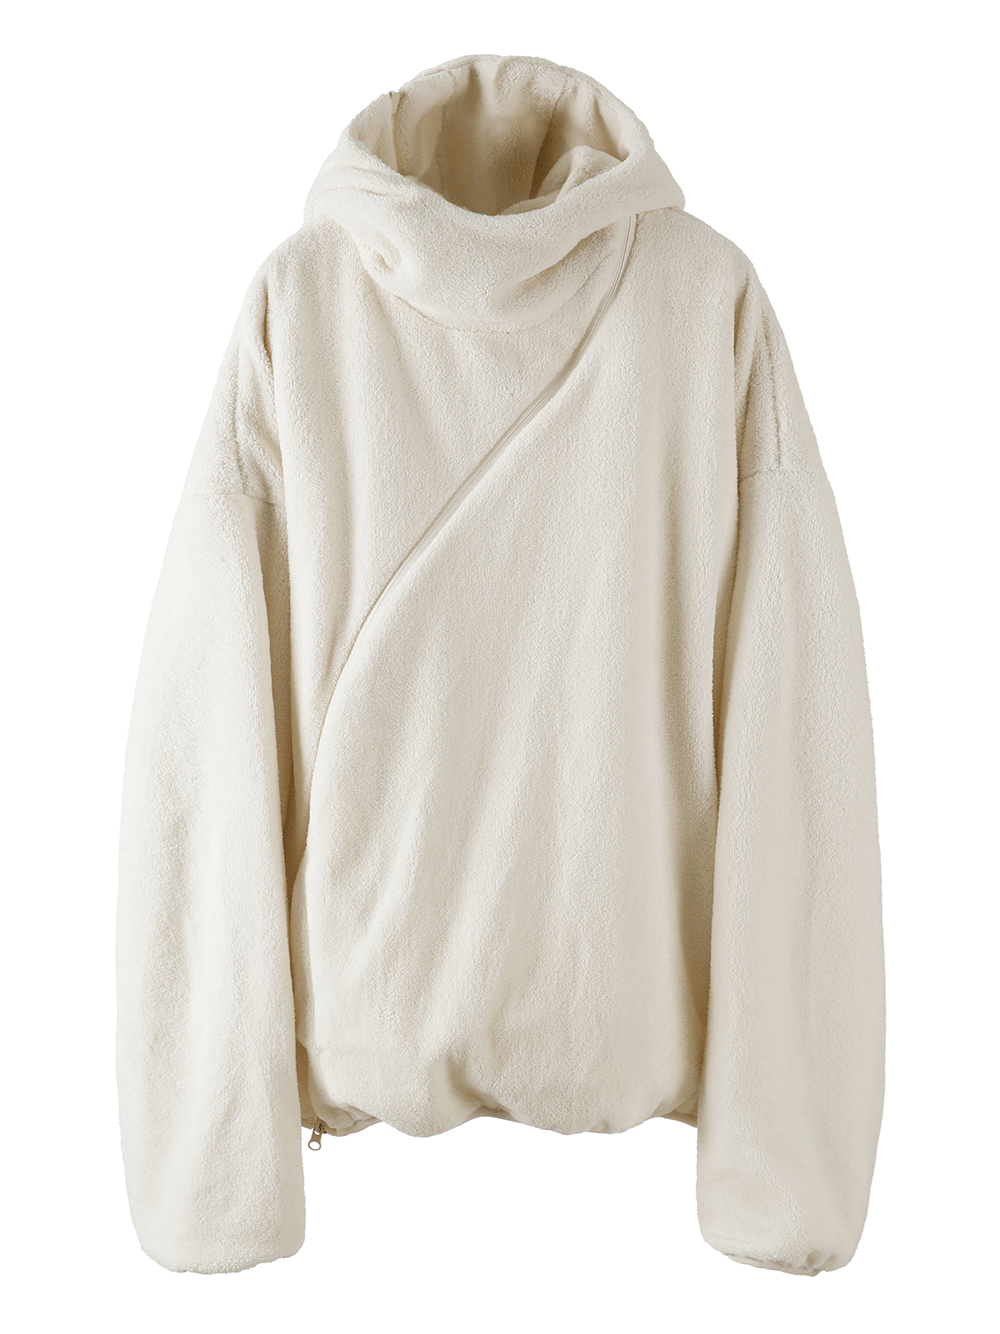 POST-ARCHIVE-FACTION-5.1-Hoodie-Center-White-1